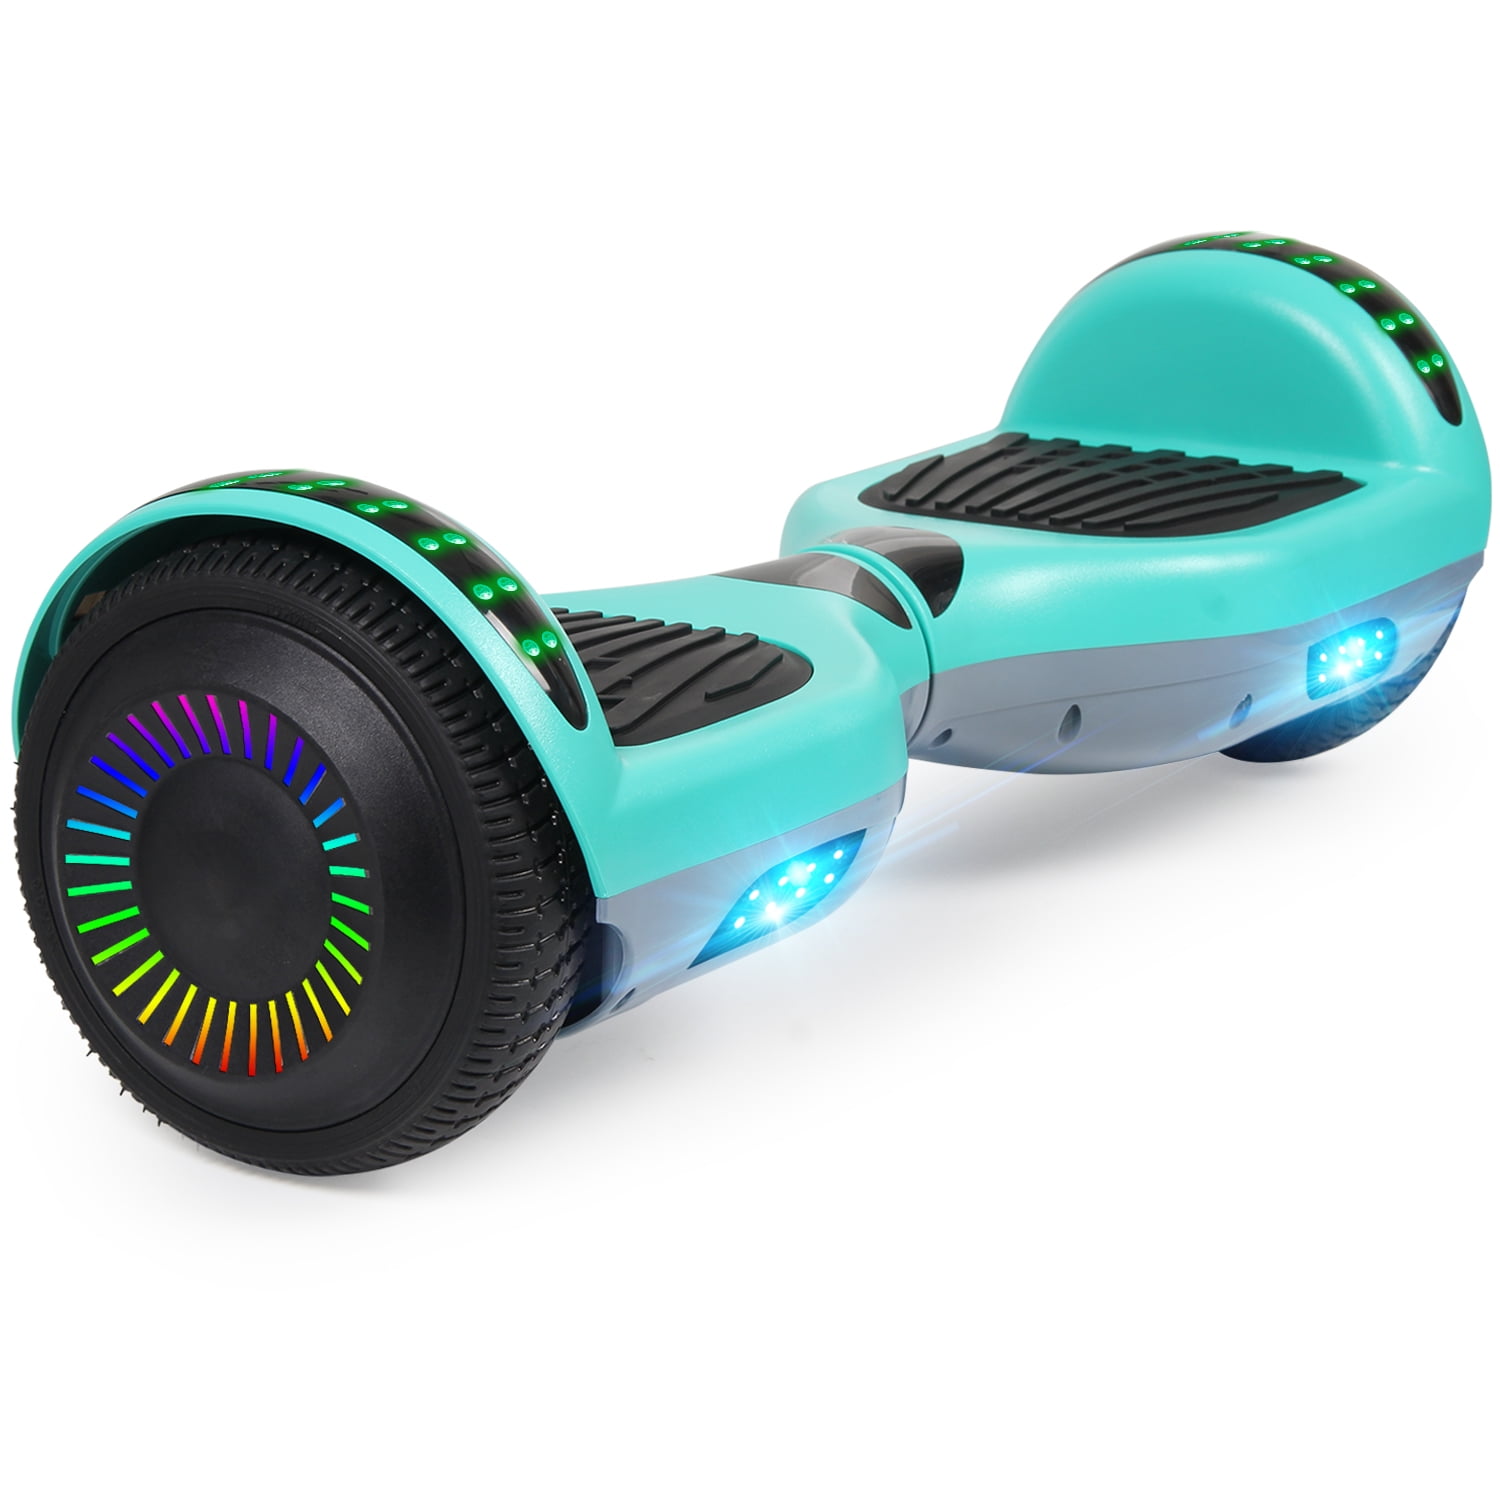 TST 6.5 Self-Balancing Electric Scooters 2 Wheels Self Balancing Hoverboard with Bluetooth LED Light Hoverboard for Kids and Adults 